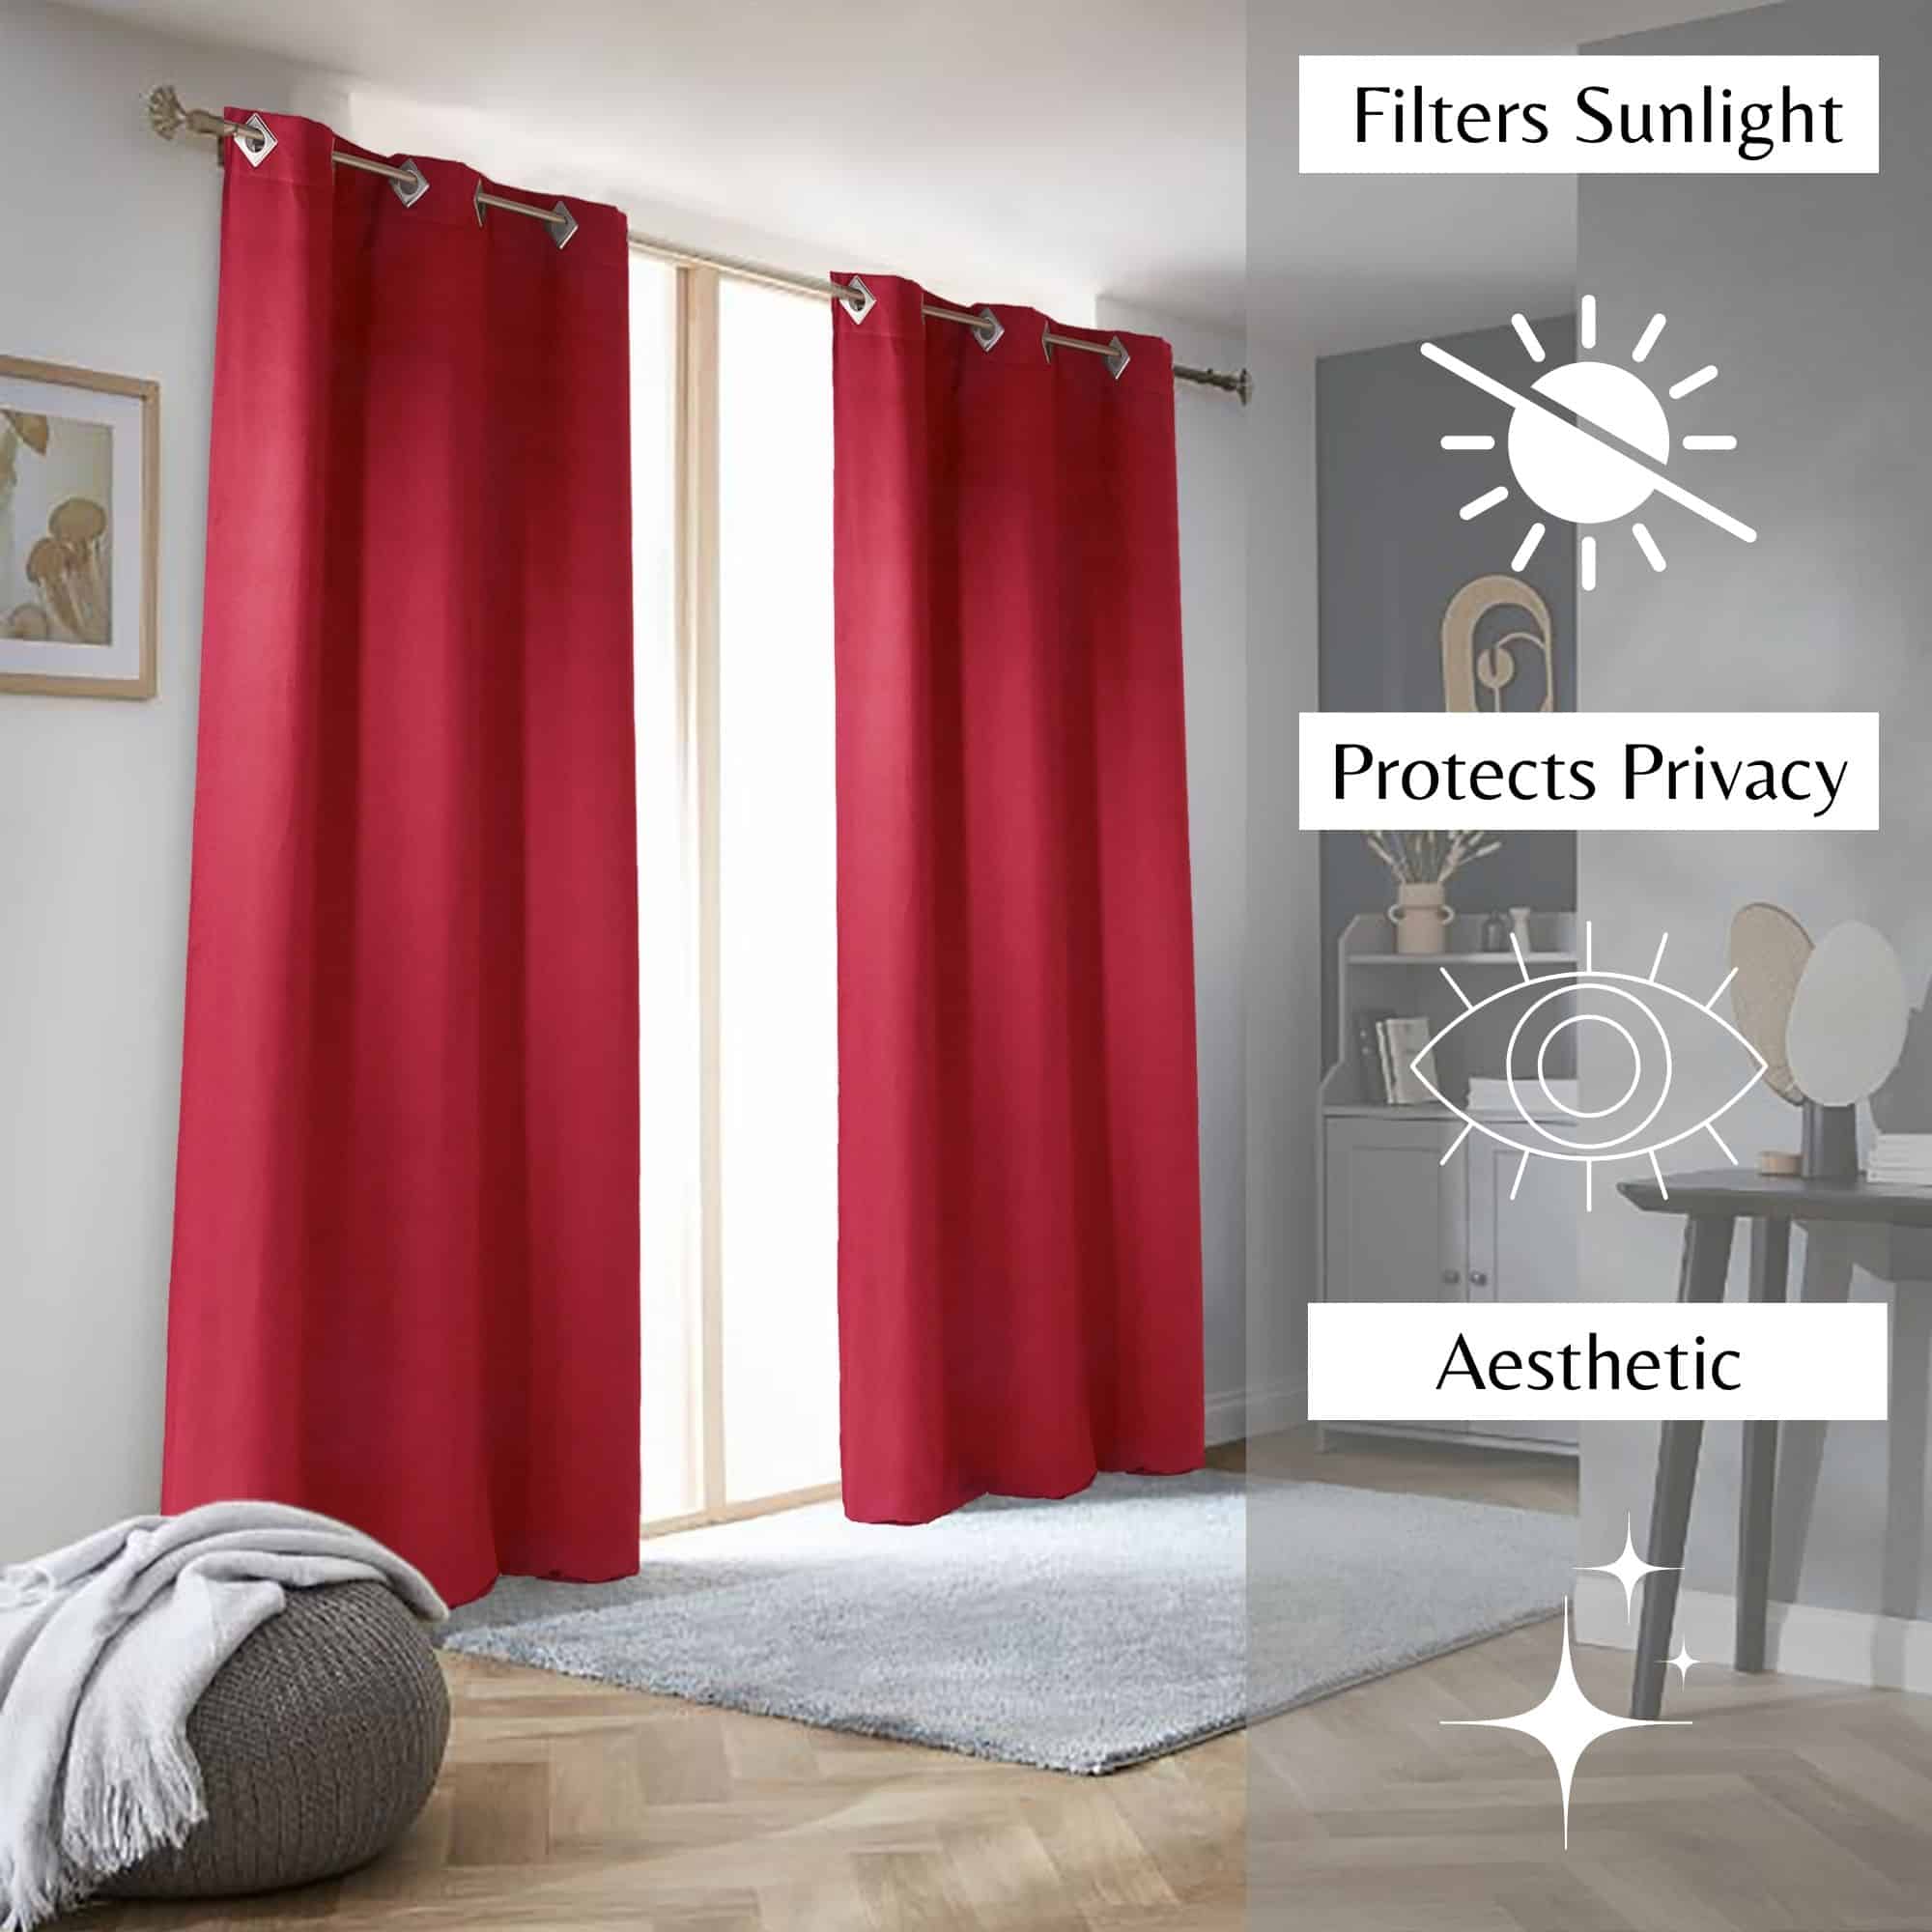 filter sunlight protect privacy aesthetic intense red curtain panels for modern interior set of 2